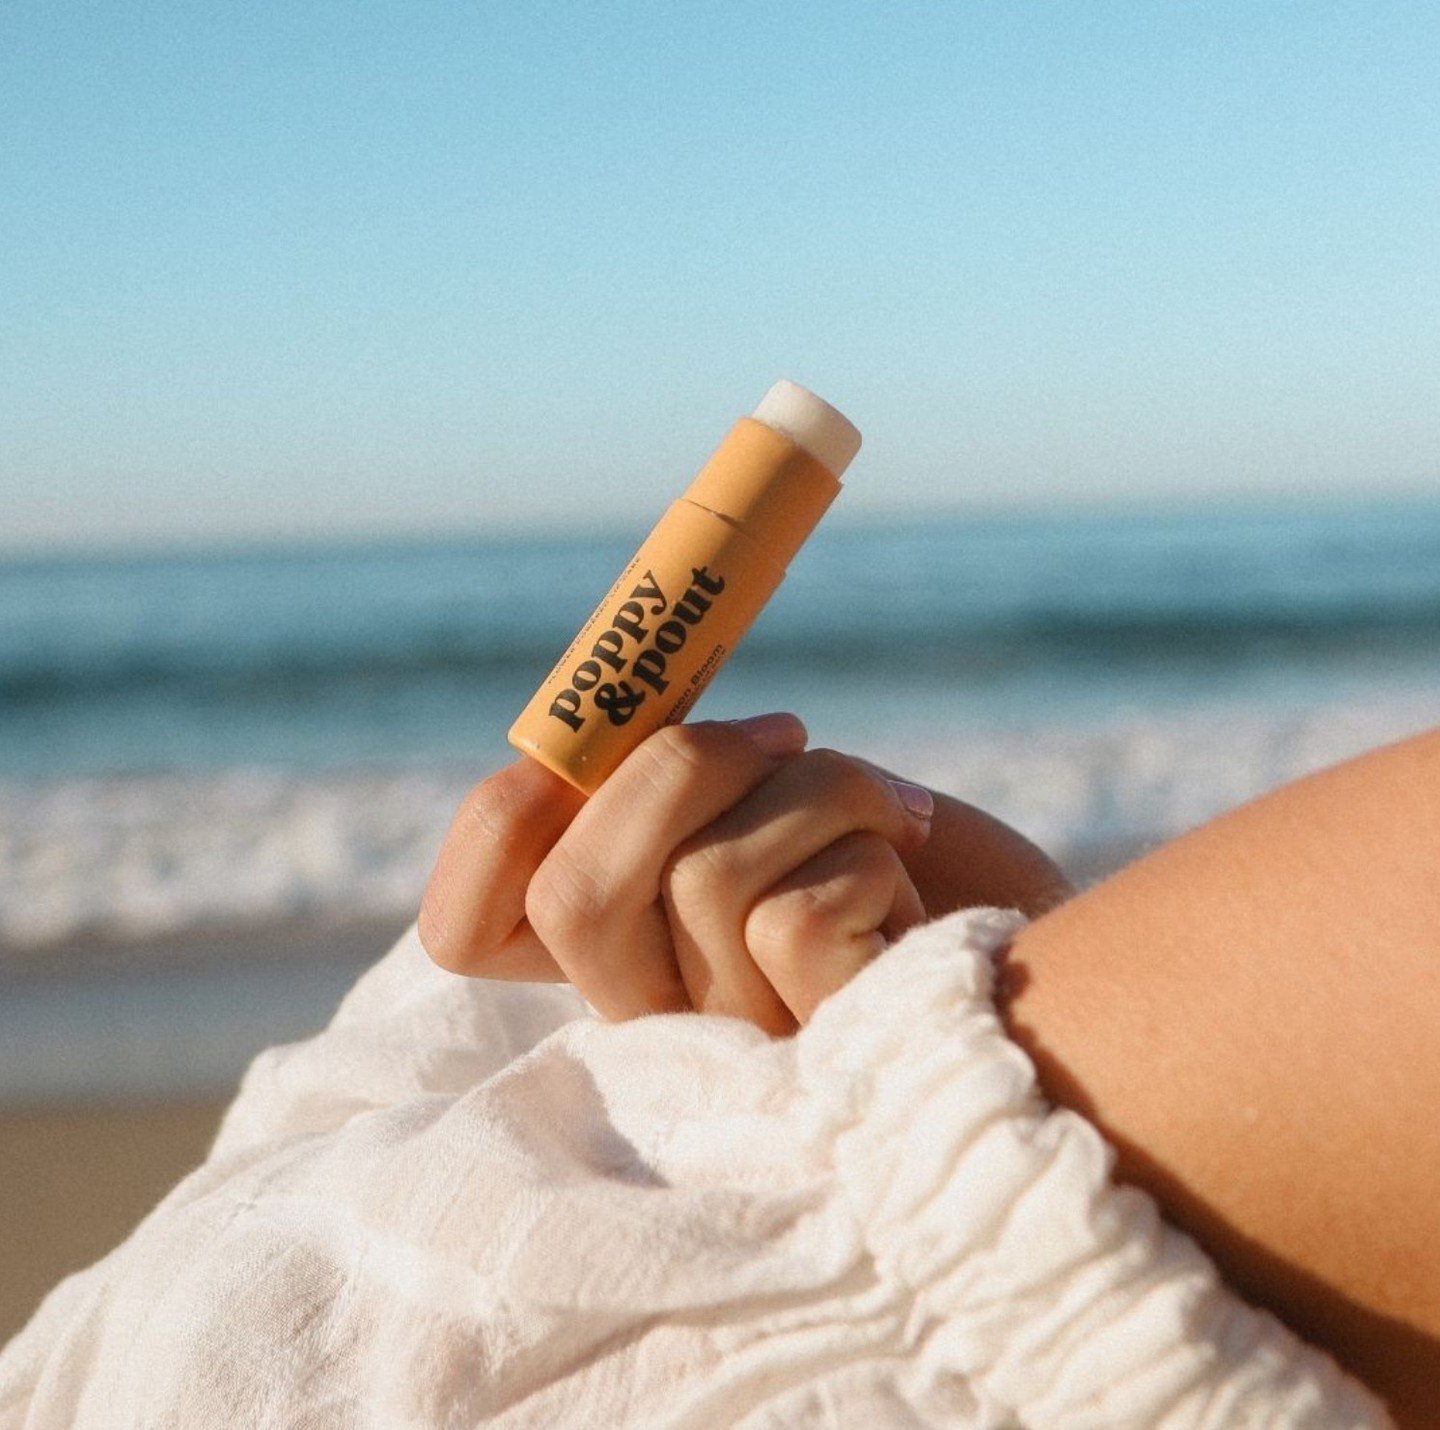 Sunshine on our lips and a smile on our face! ⁠
⁠
Keep your lips hydrated and ready for those sunny kisses with Poppy &amp; Pout this summer. 100% natural ingredients, eco-friendly, and are cruelty-free. Experience the magic of floral scents &amp; na